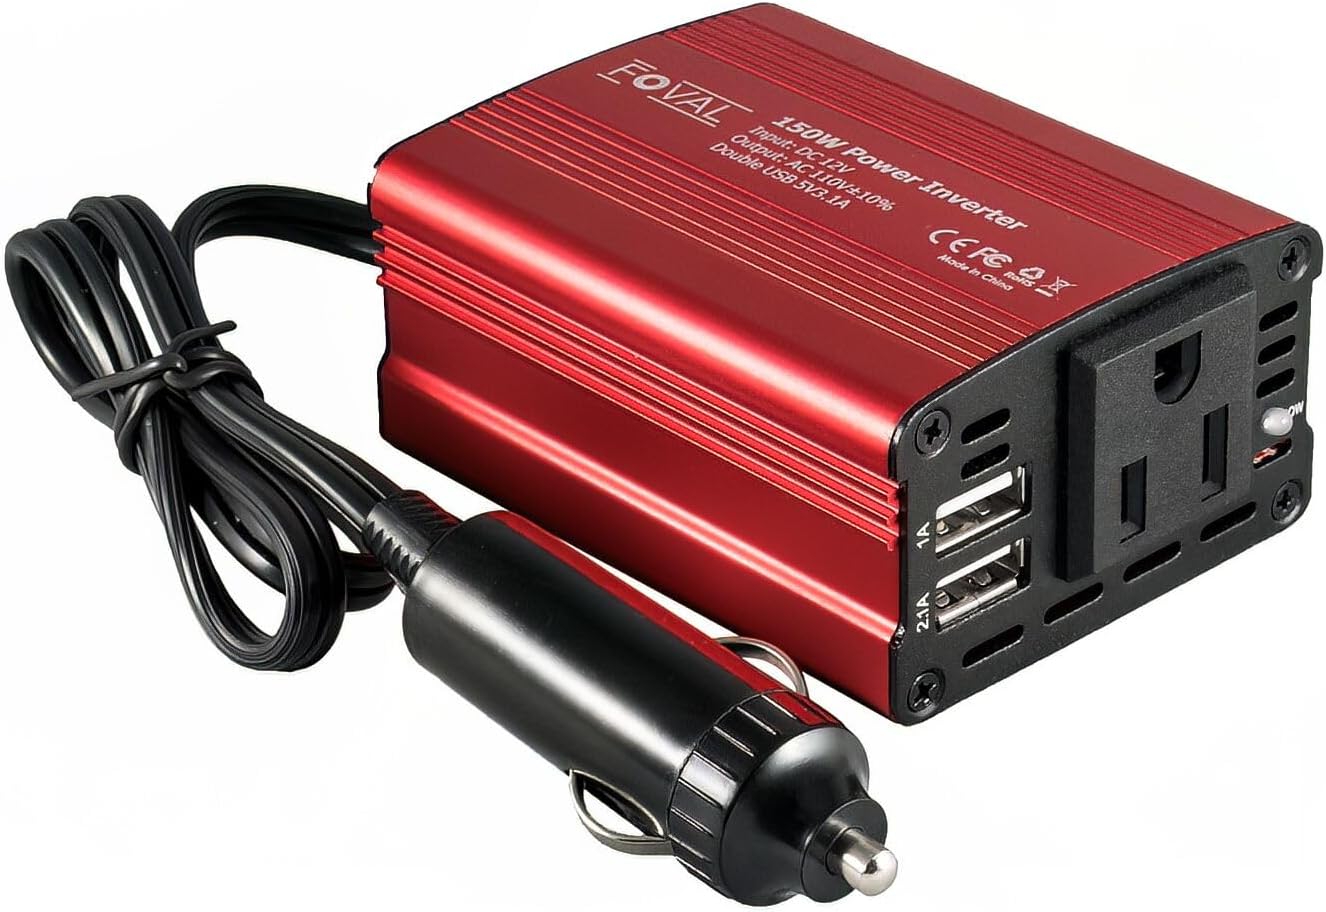 FOVAL 3.1A Power Inverters for Car